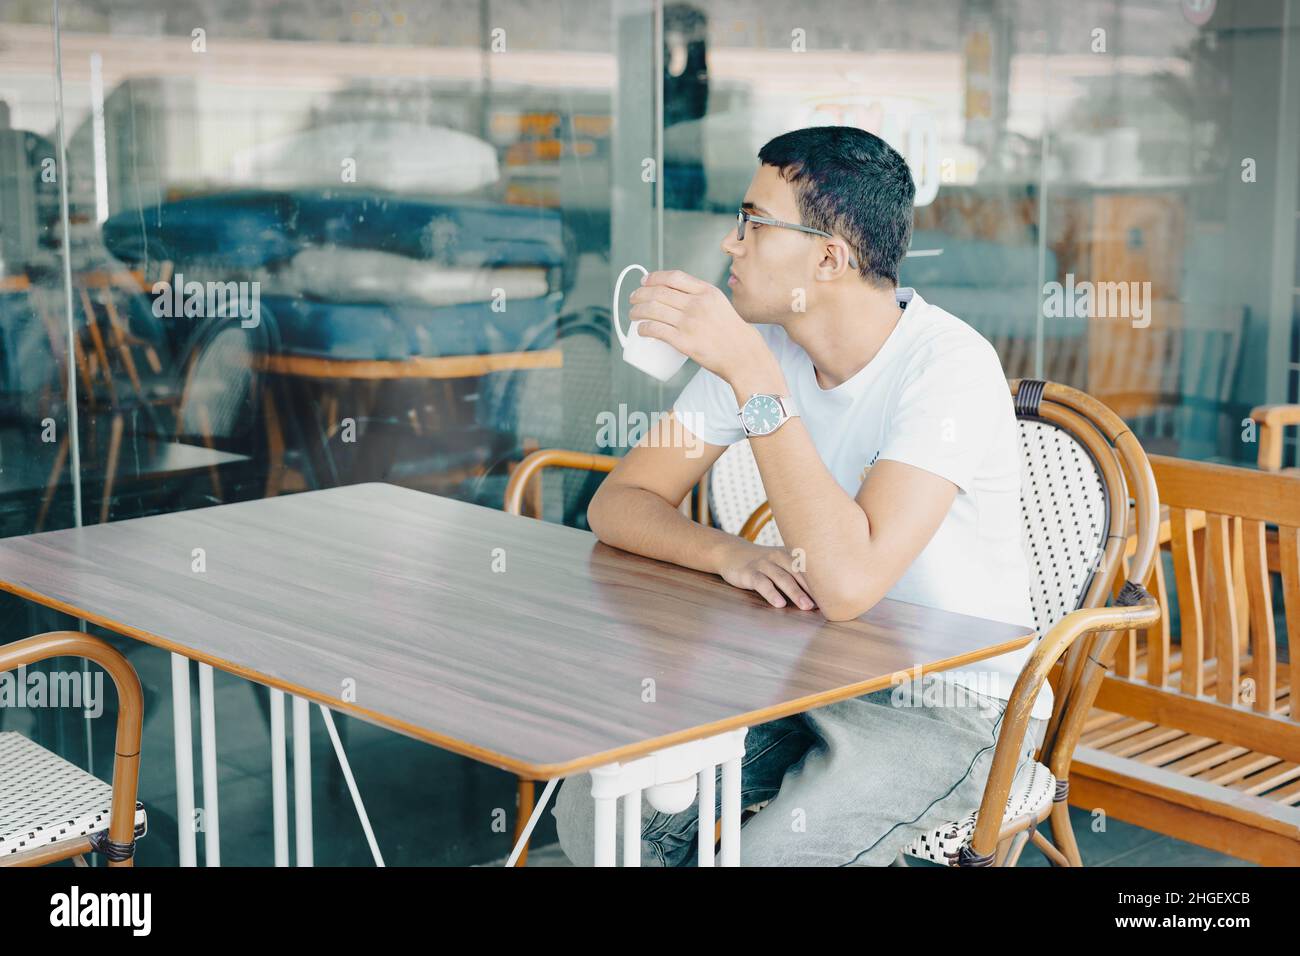 Close-Up Of Young Man Holding Coffe Cup In Cafe. Teenager In A Cafe Drinking Cup Of Tea, Deep In Thought. Stock Photo